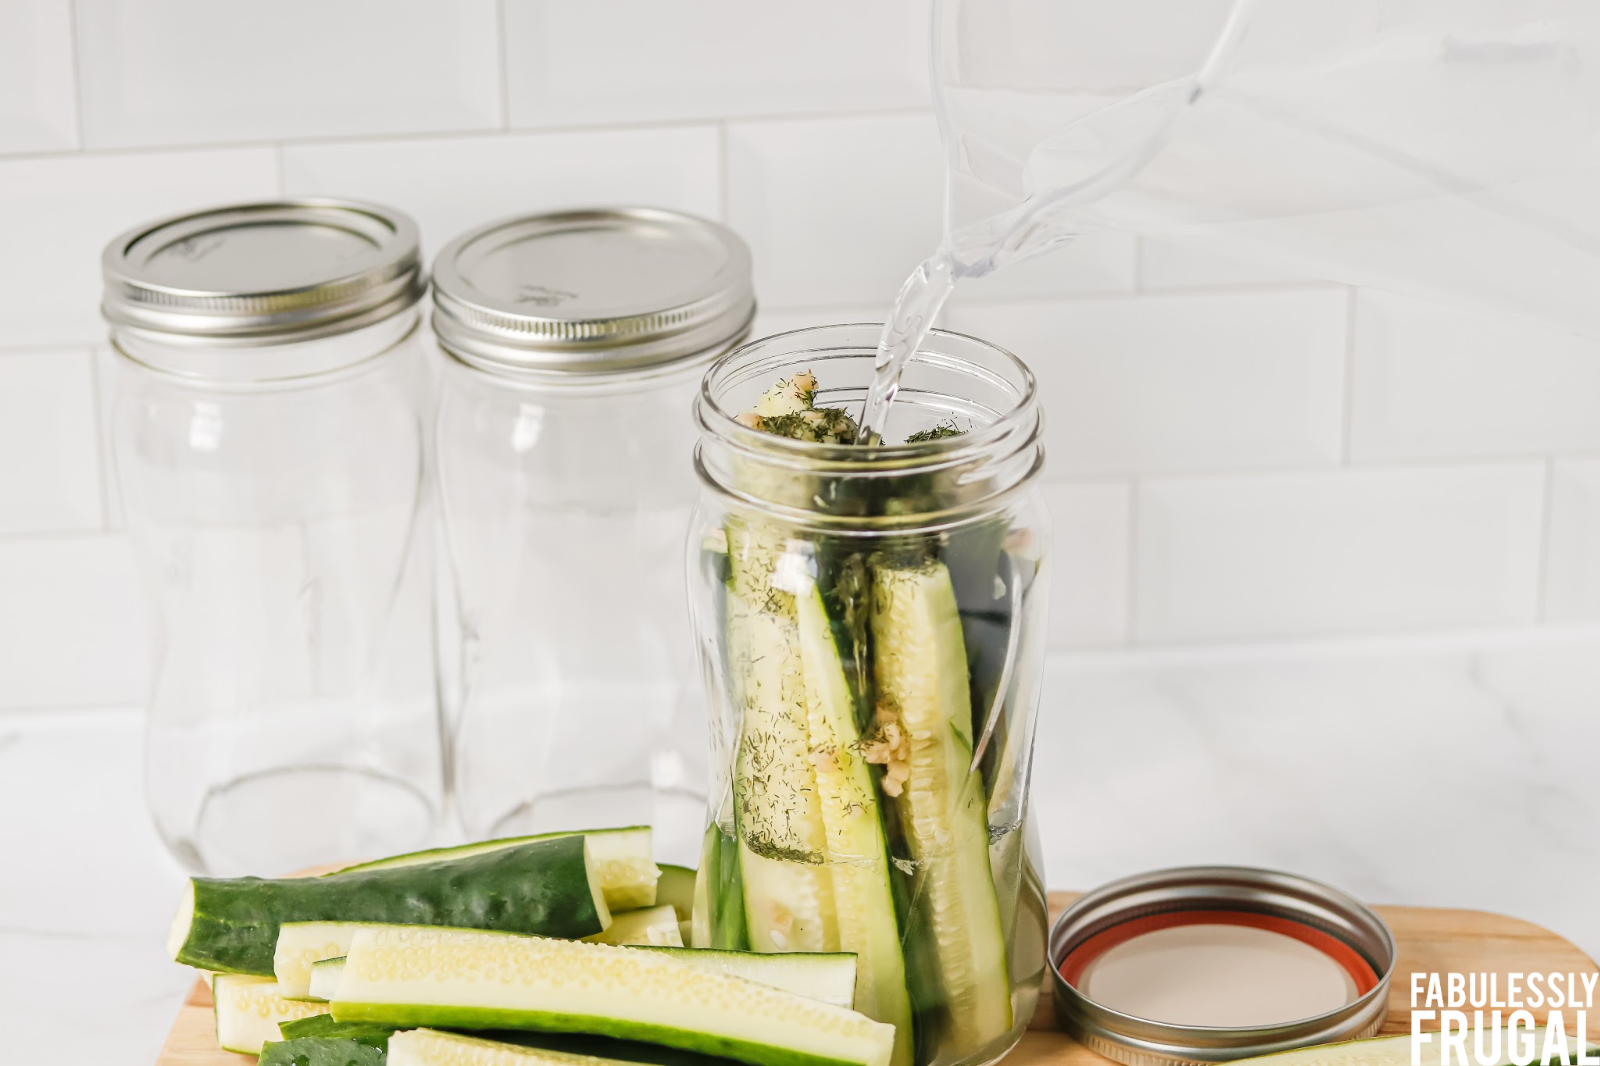 Making pickles at home